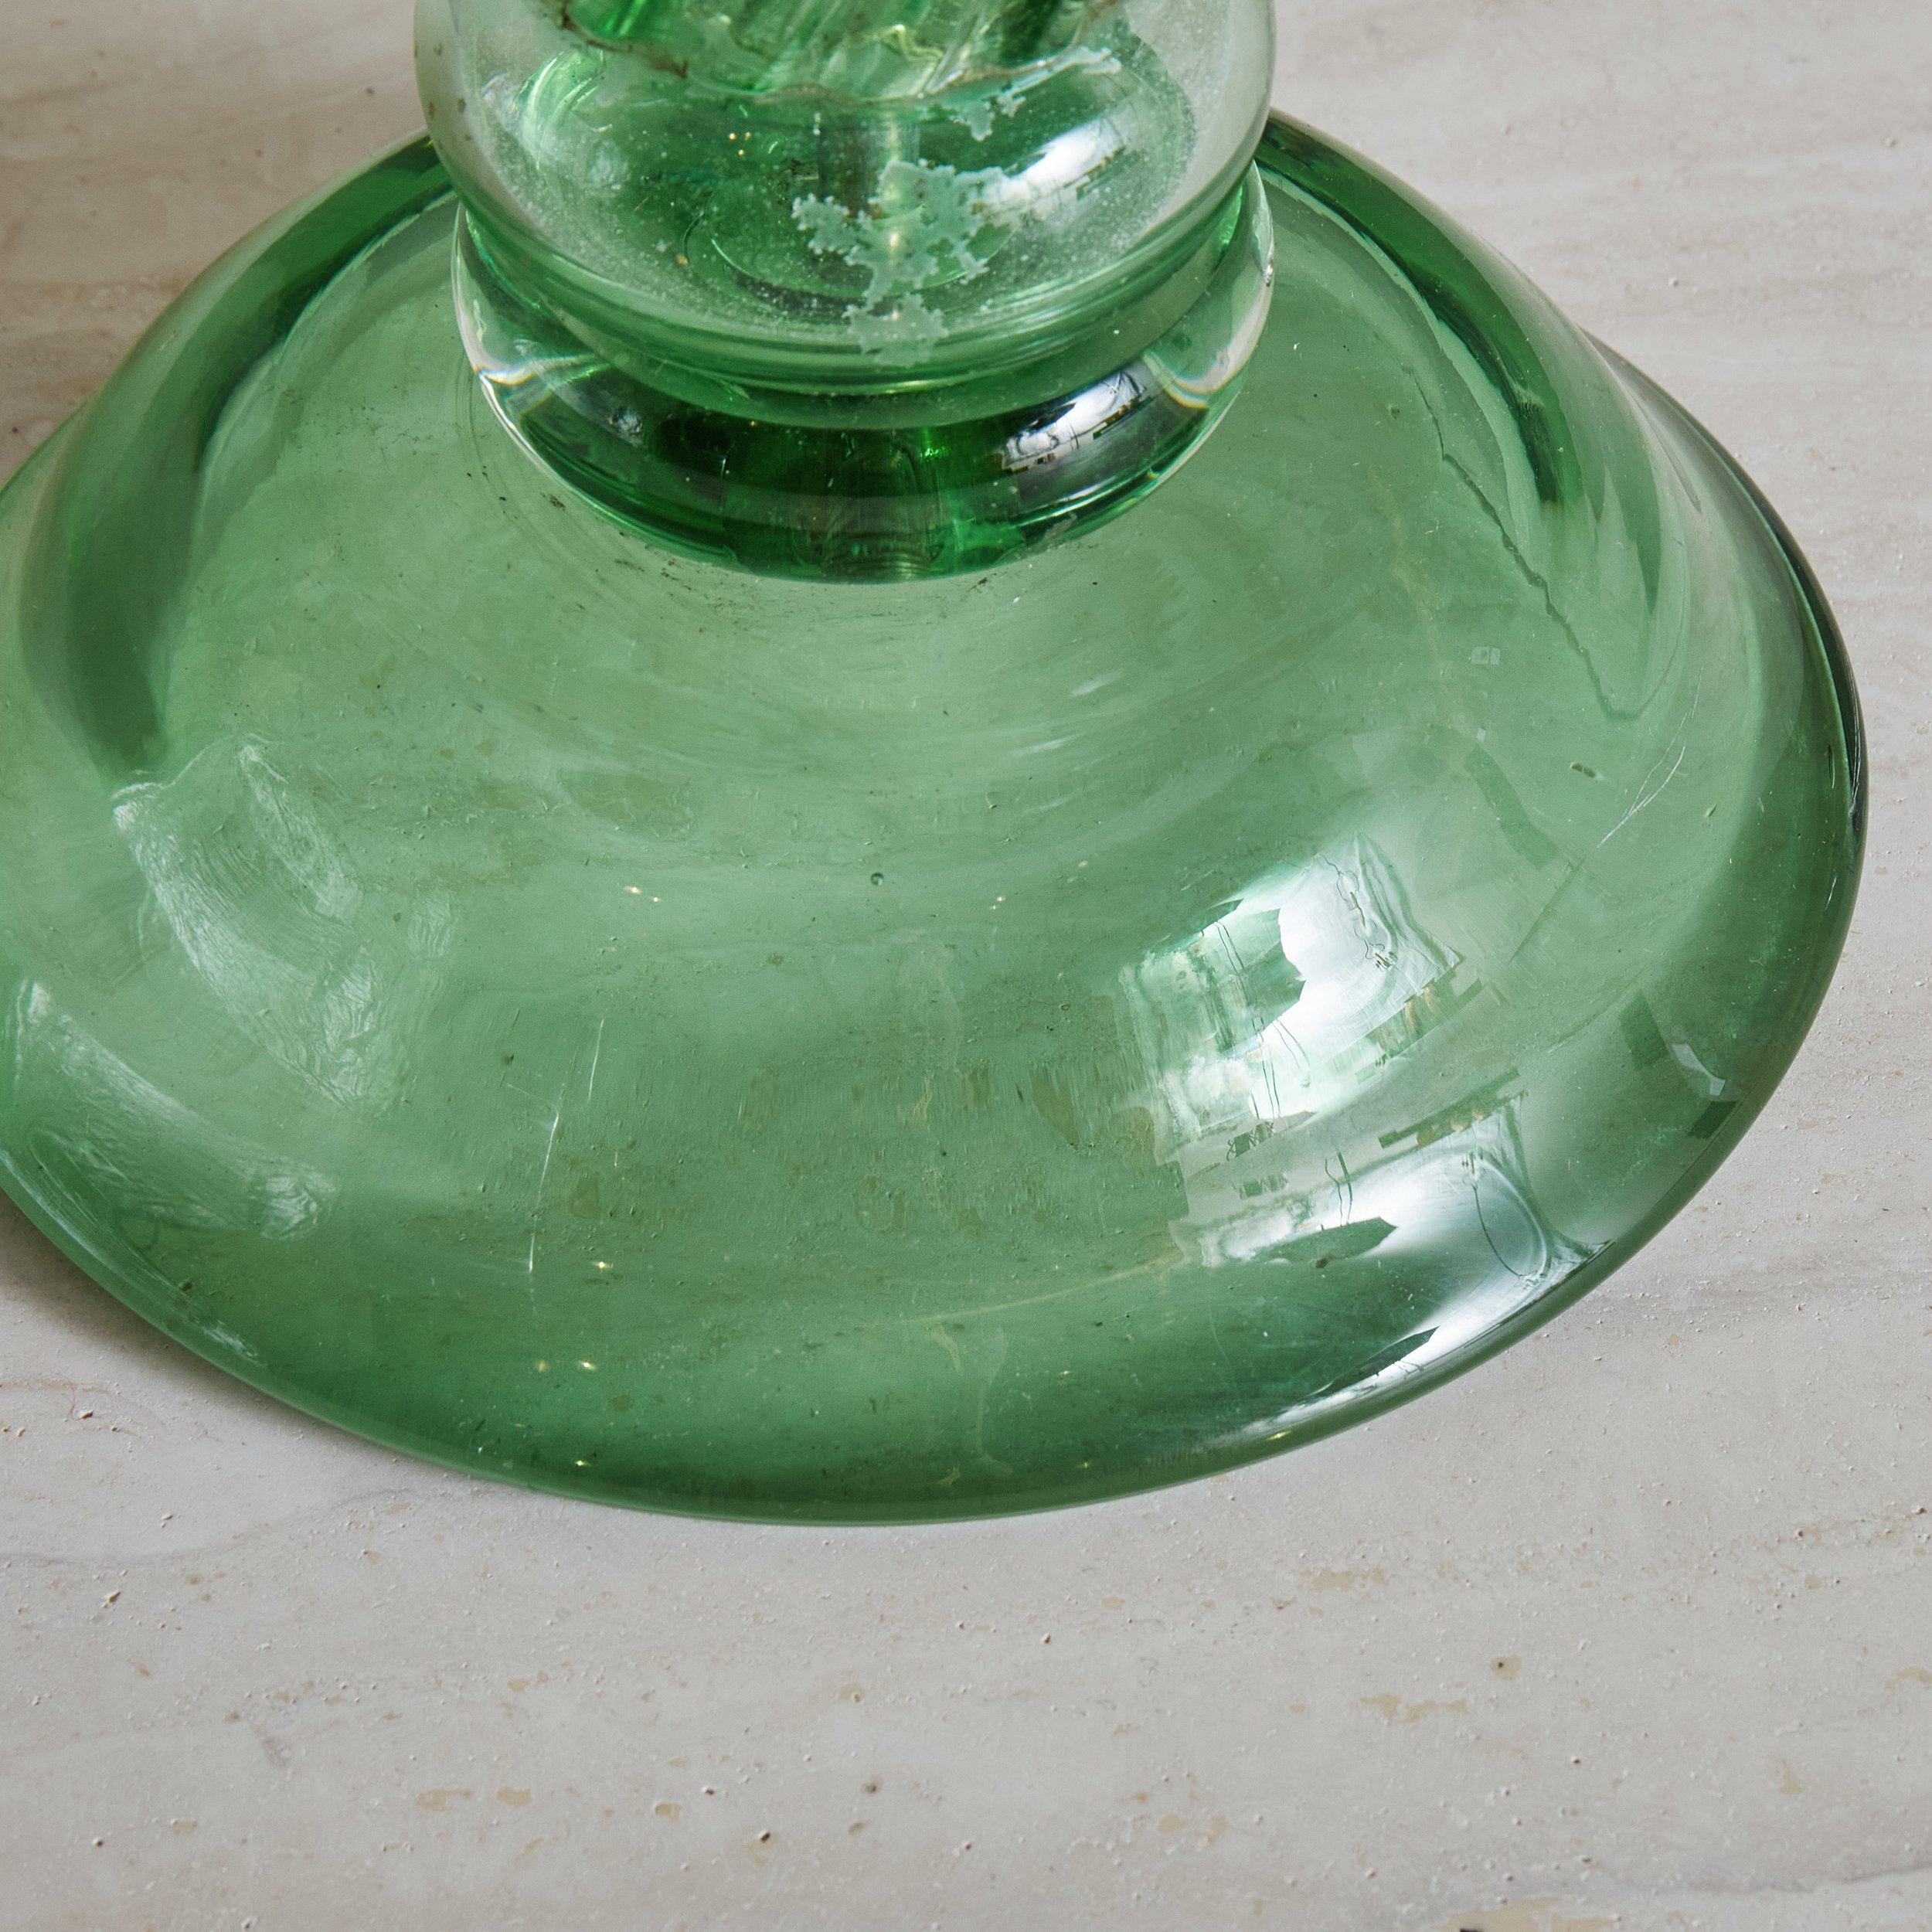 A 1940s Italian table lamp hand blown with Murano glass in a striking emerald green hue. This lamp has a swirled pedestal base and was newly rewired with brushed brass hardware. Lampshade is not included. Unmarked. Sourced in Italy, 1940s.
 

